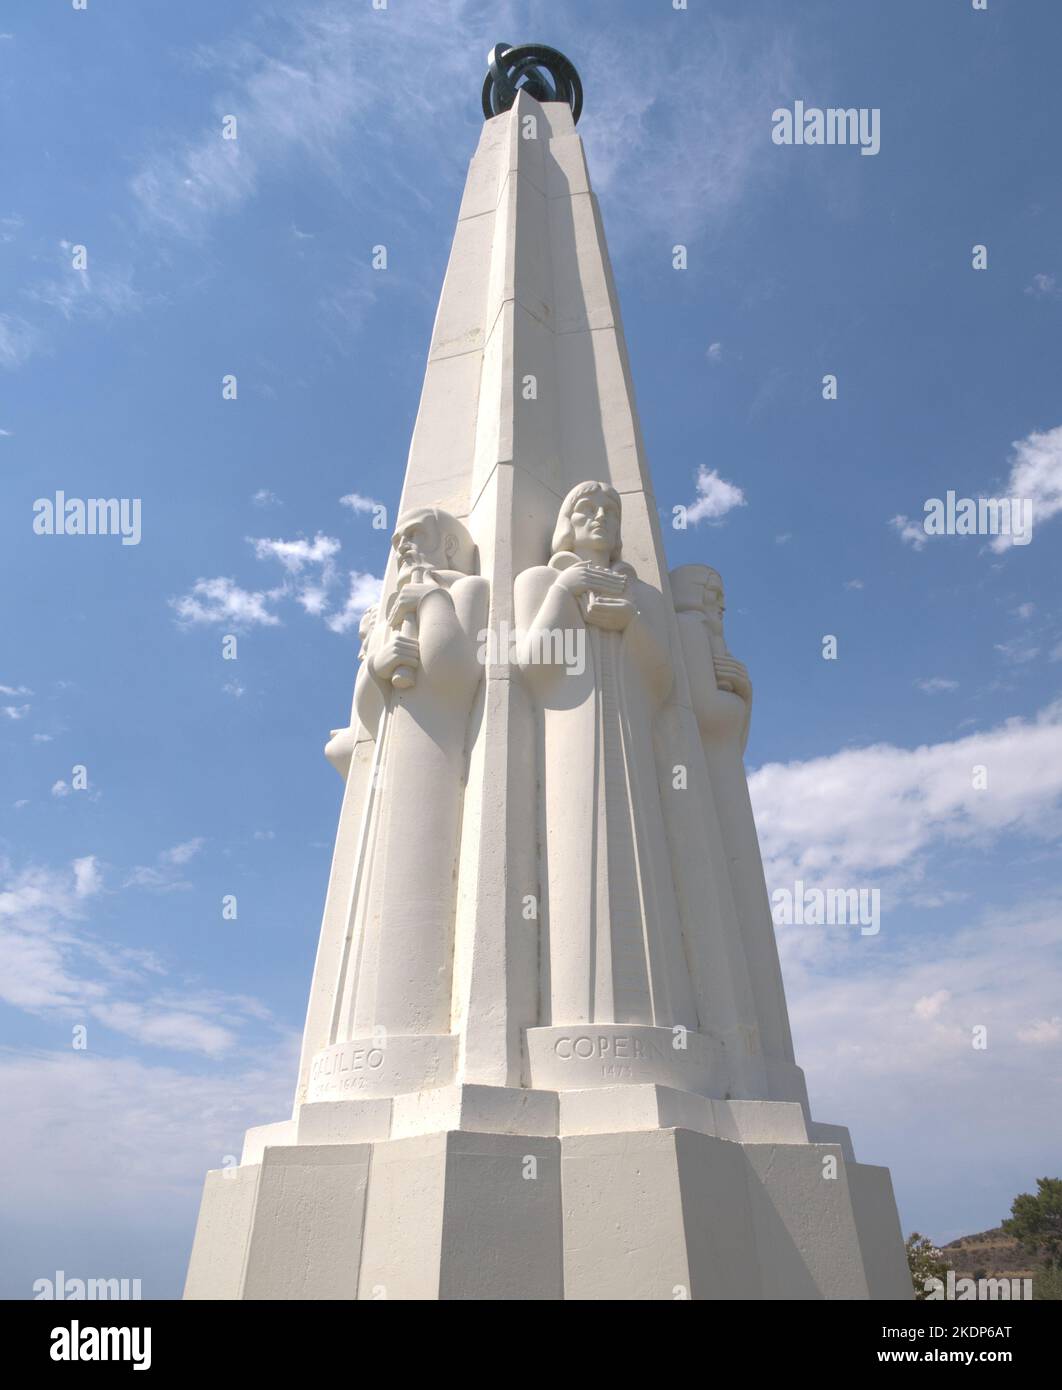 Astronomers Monument at the Griffith Observatory in Los Angeles, California Stock Photo